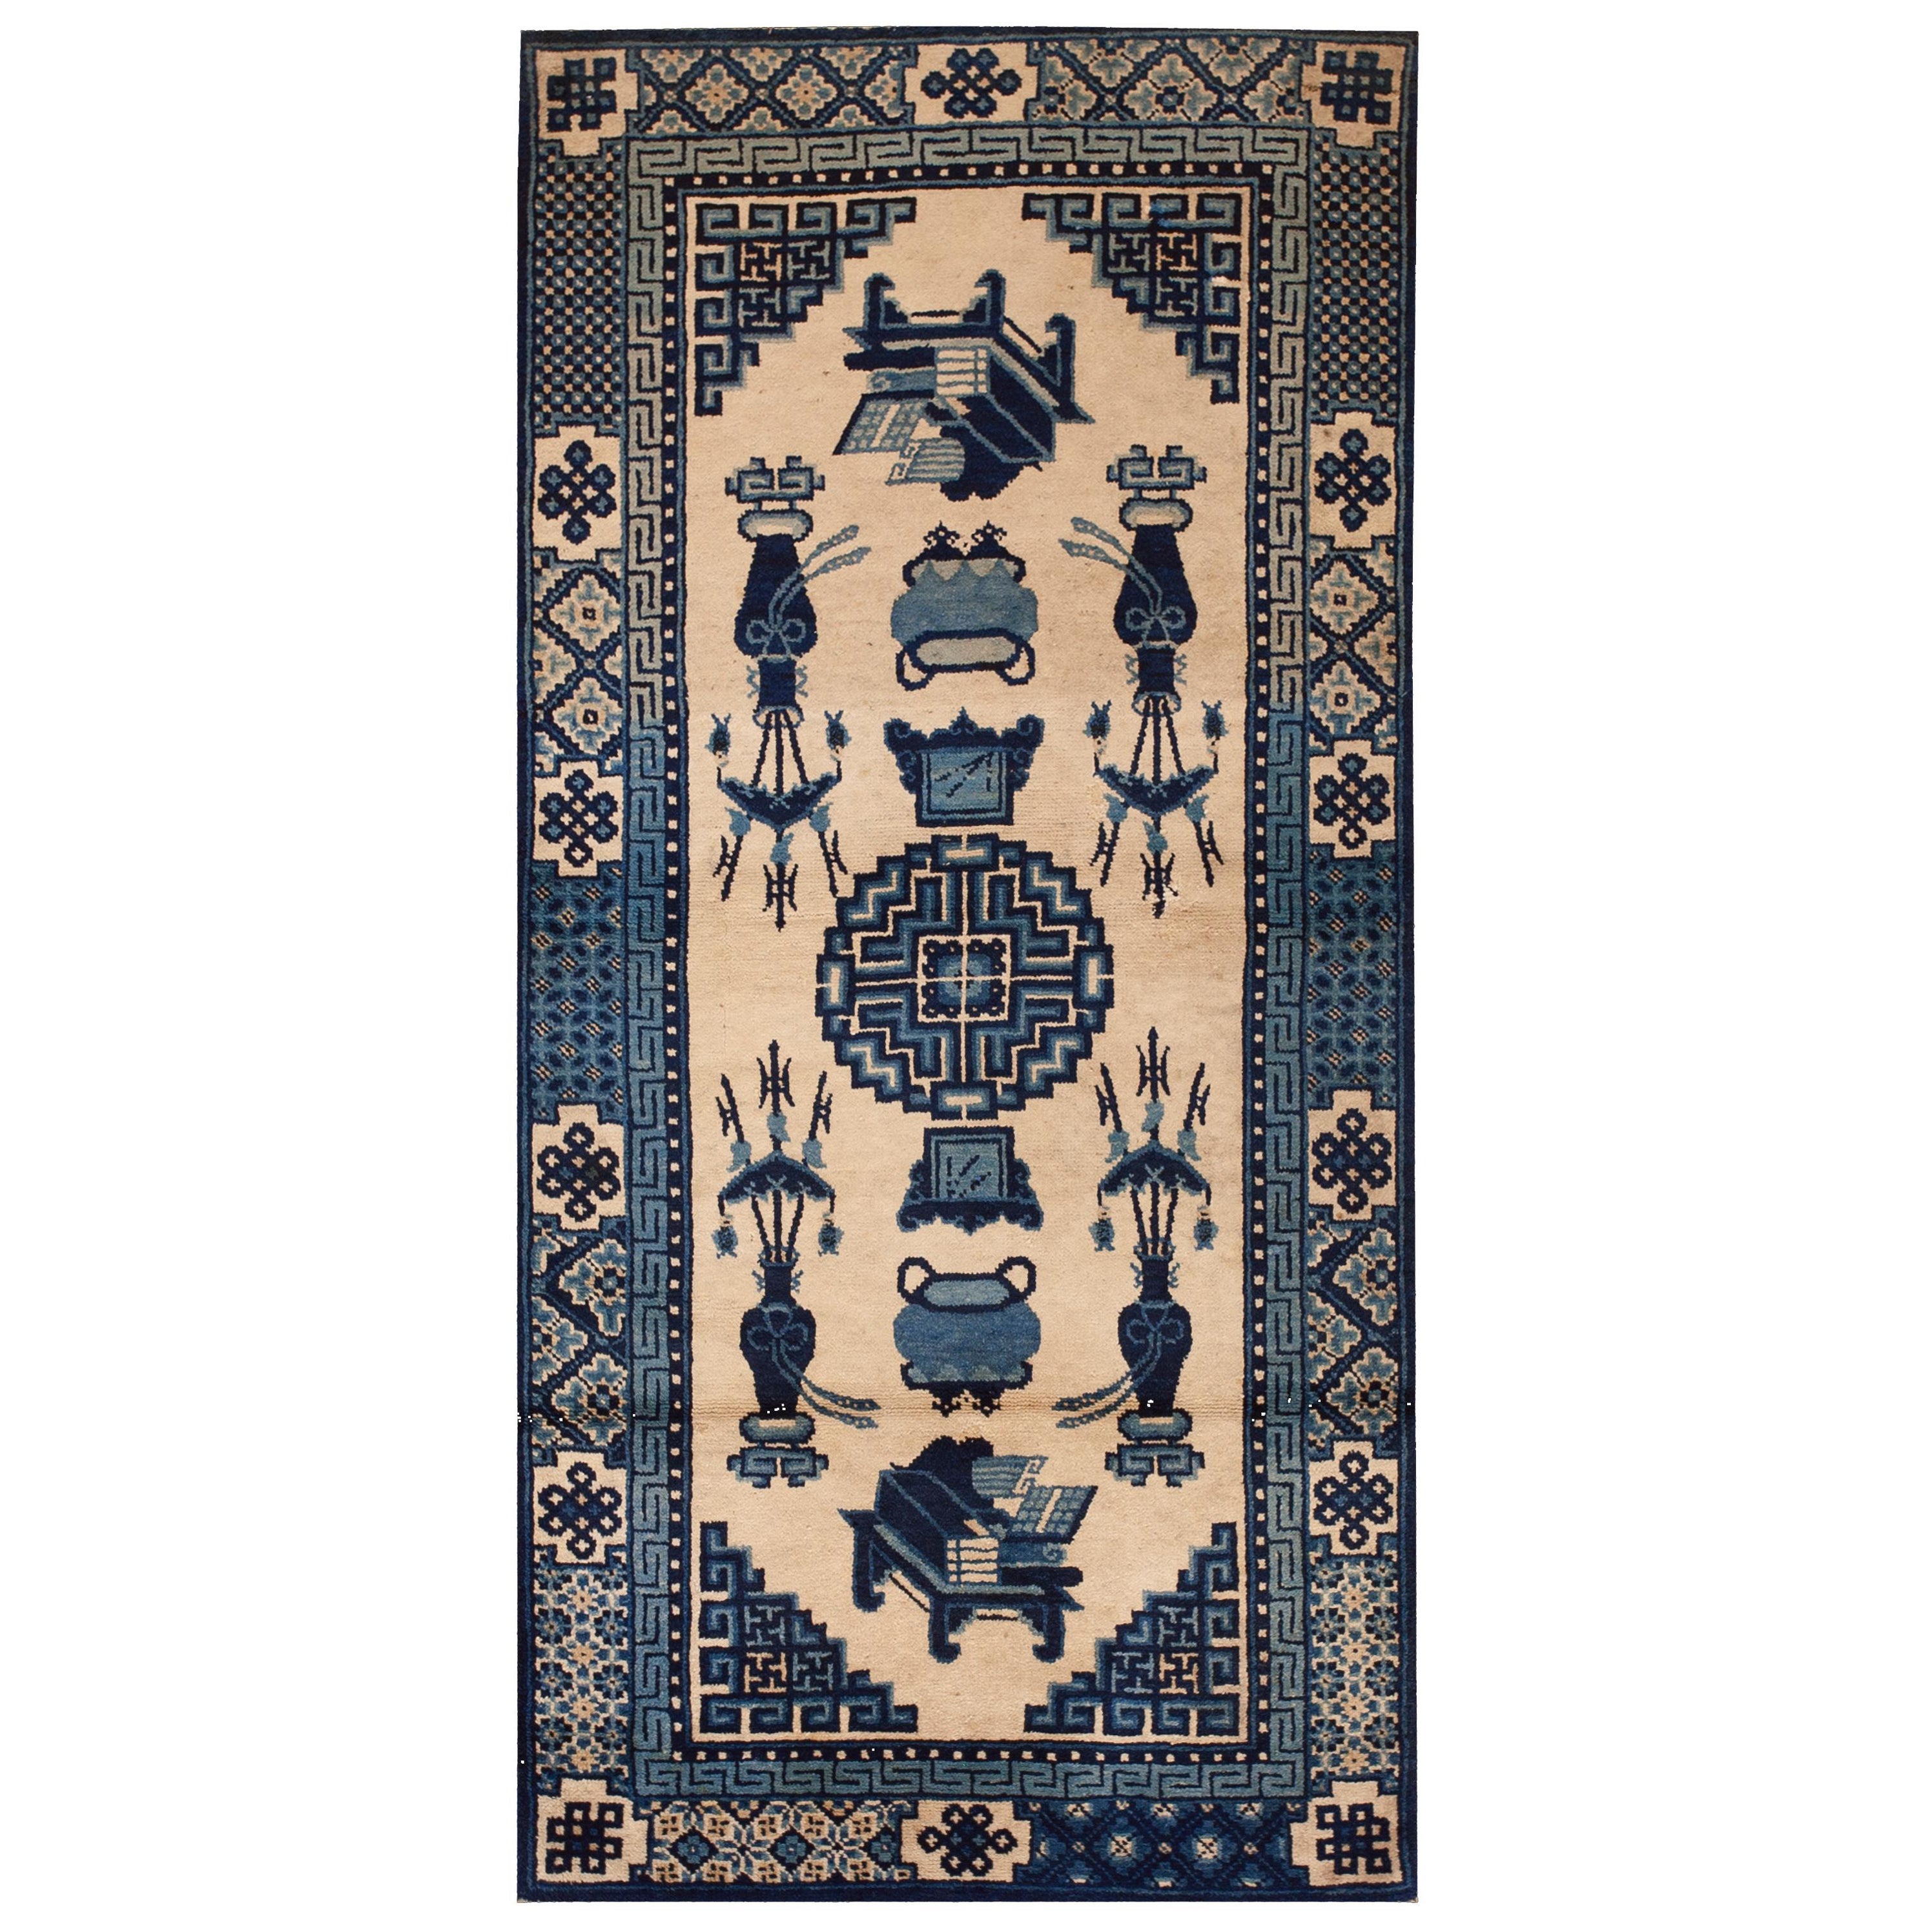 Early 20th Century N. Chinese Baotou Carpet ( 2'6" x 5'3" - 70 x 137 ) For Sale